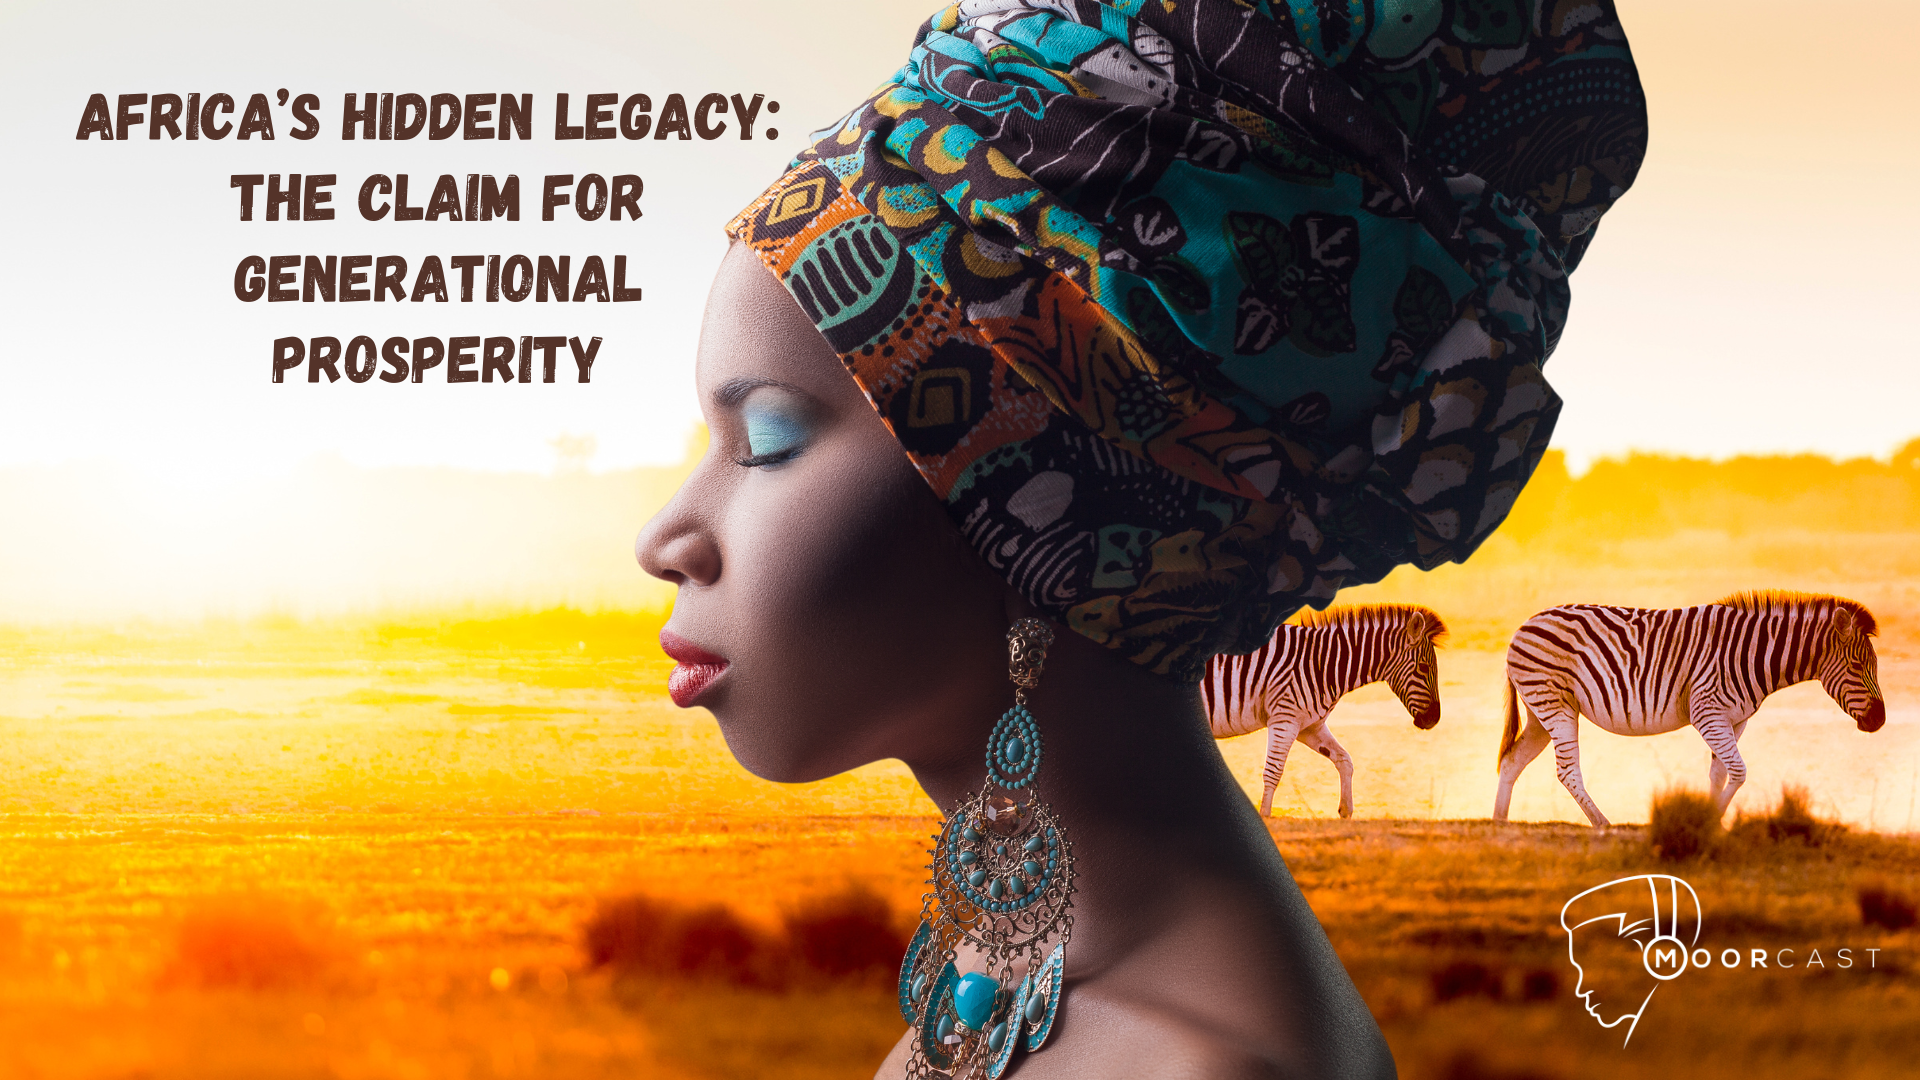 Africa's Hidden Legacy: The Claim For Generational Prosperity - Part 1